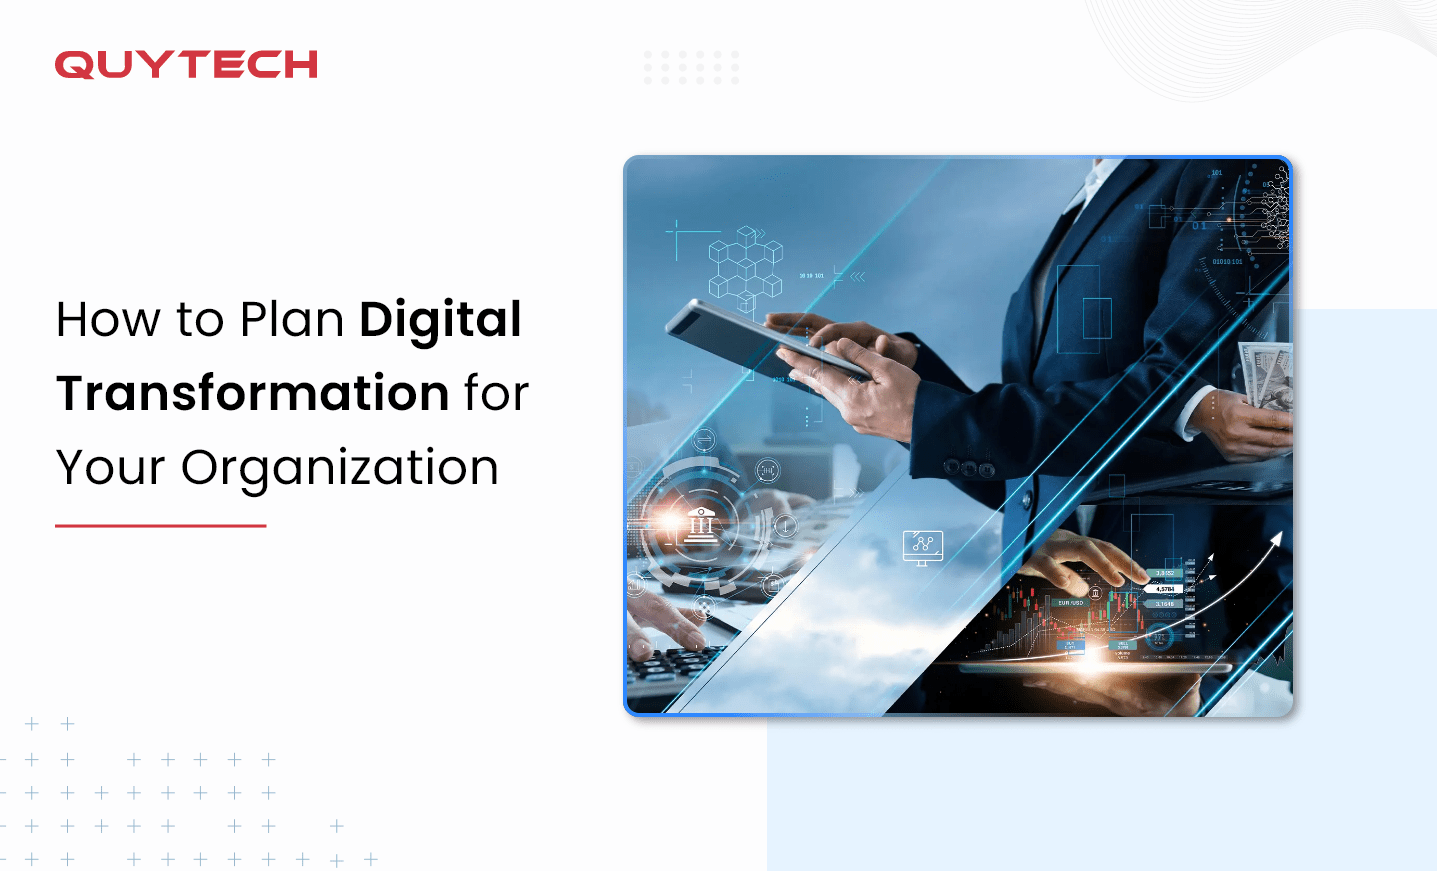 How to Plan Digital Transformation for Your Organization